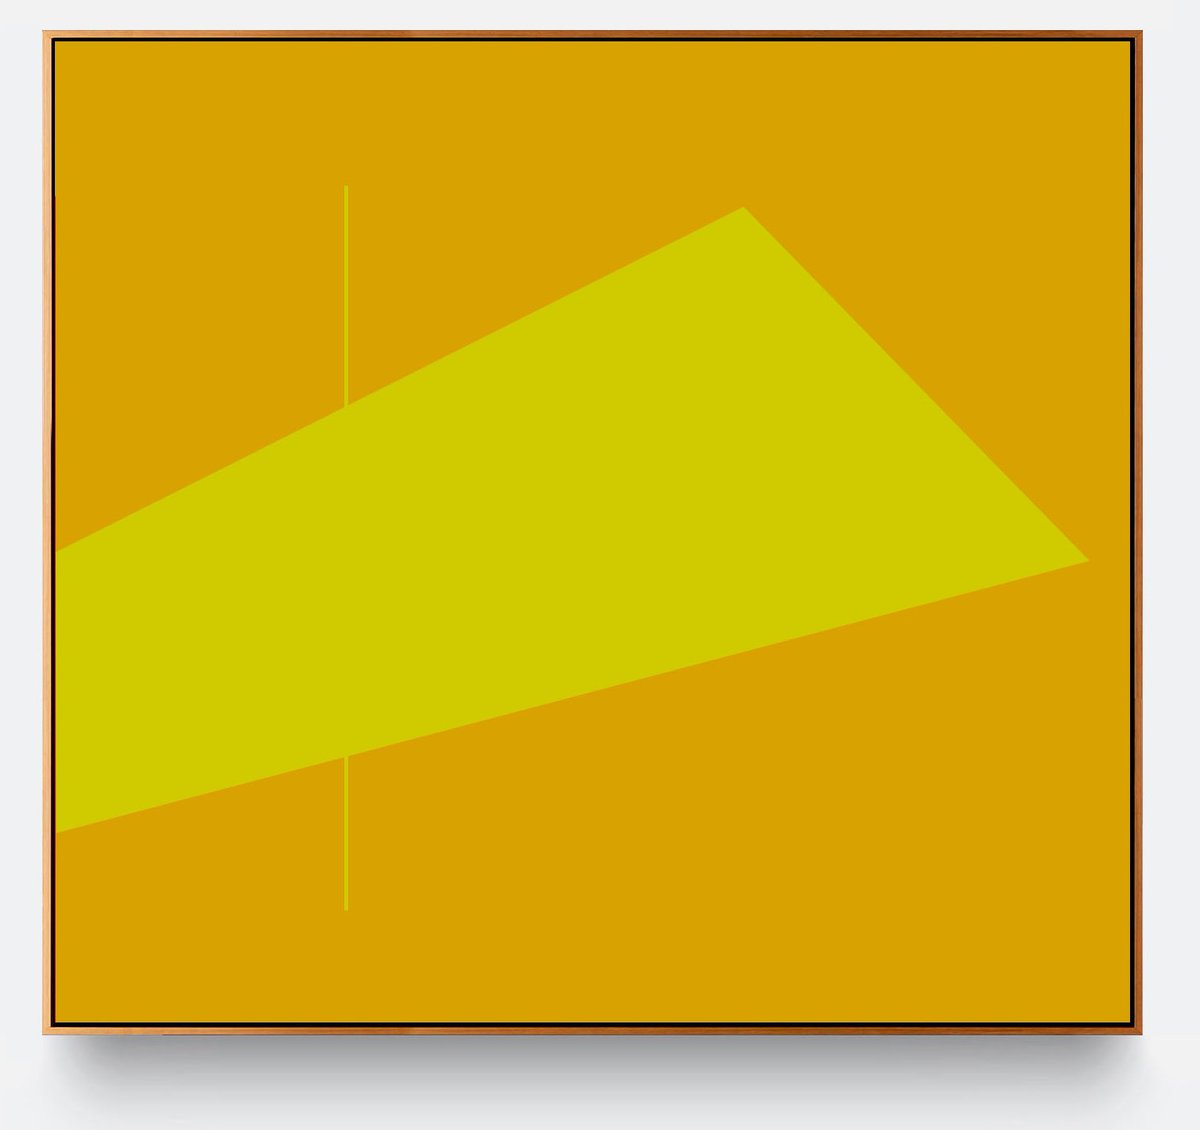 abstractart yellow yellow
𝚊𝚕𝚎𝚡𝚊𝚗𝚍𝚛𝚎𝚐𝚞𝚒𝚕𝚕𝚊𝚞𝚖𝚎𝚊𝚛𝚝
2023#T246 Size 75-in x 75-in.
#yellow #abstractart #yellowart #yellowpainting #abstract #alexandreguillaume #alexandreguillaumeart #abstractartist #abstractartwork #yellowline #AIArtworks #AIイラスト